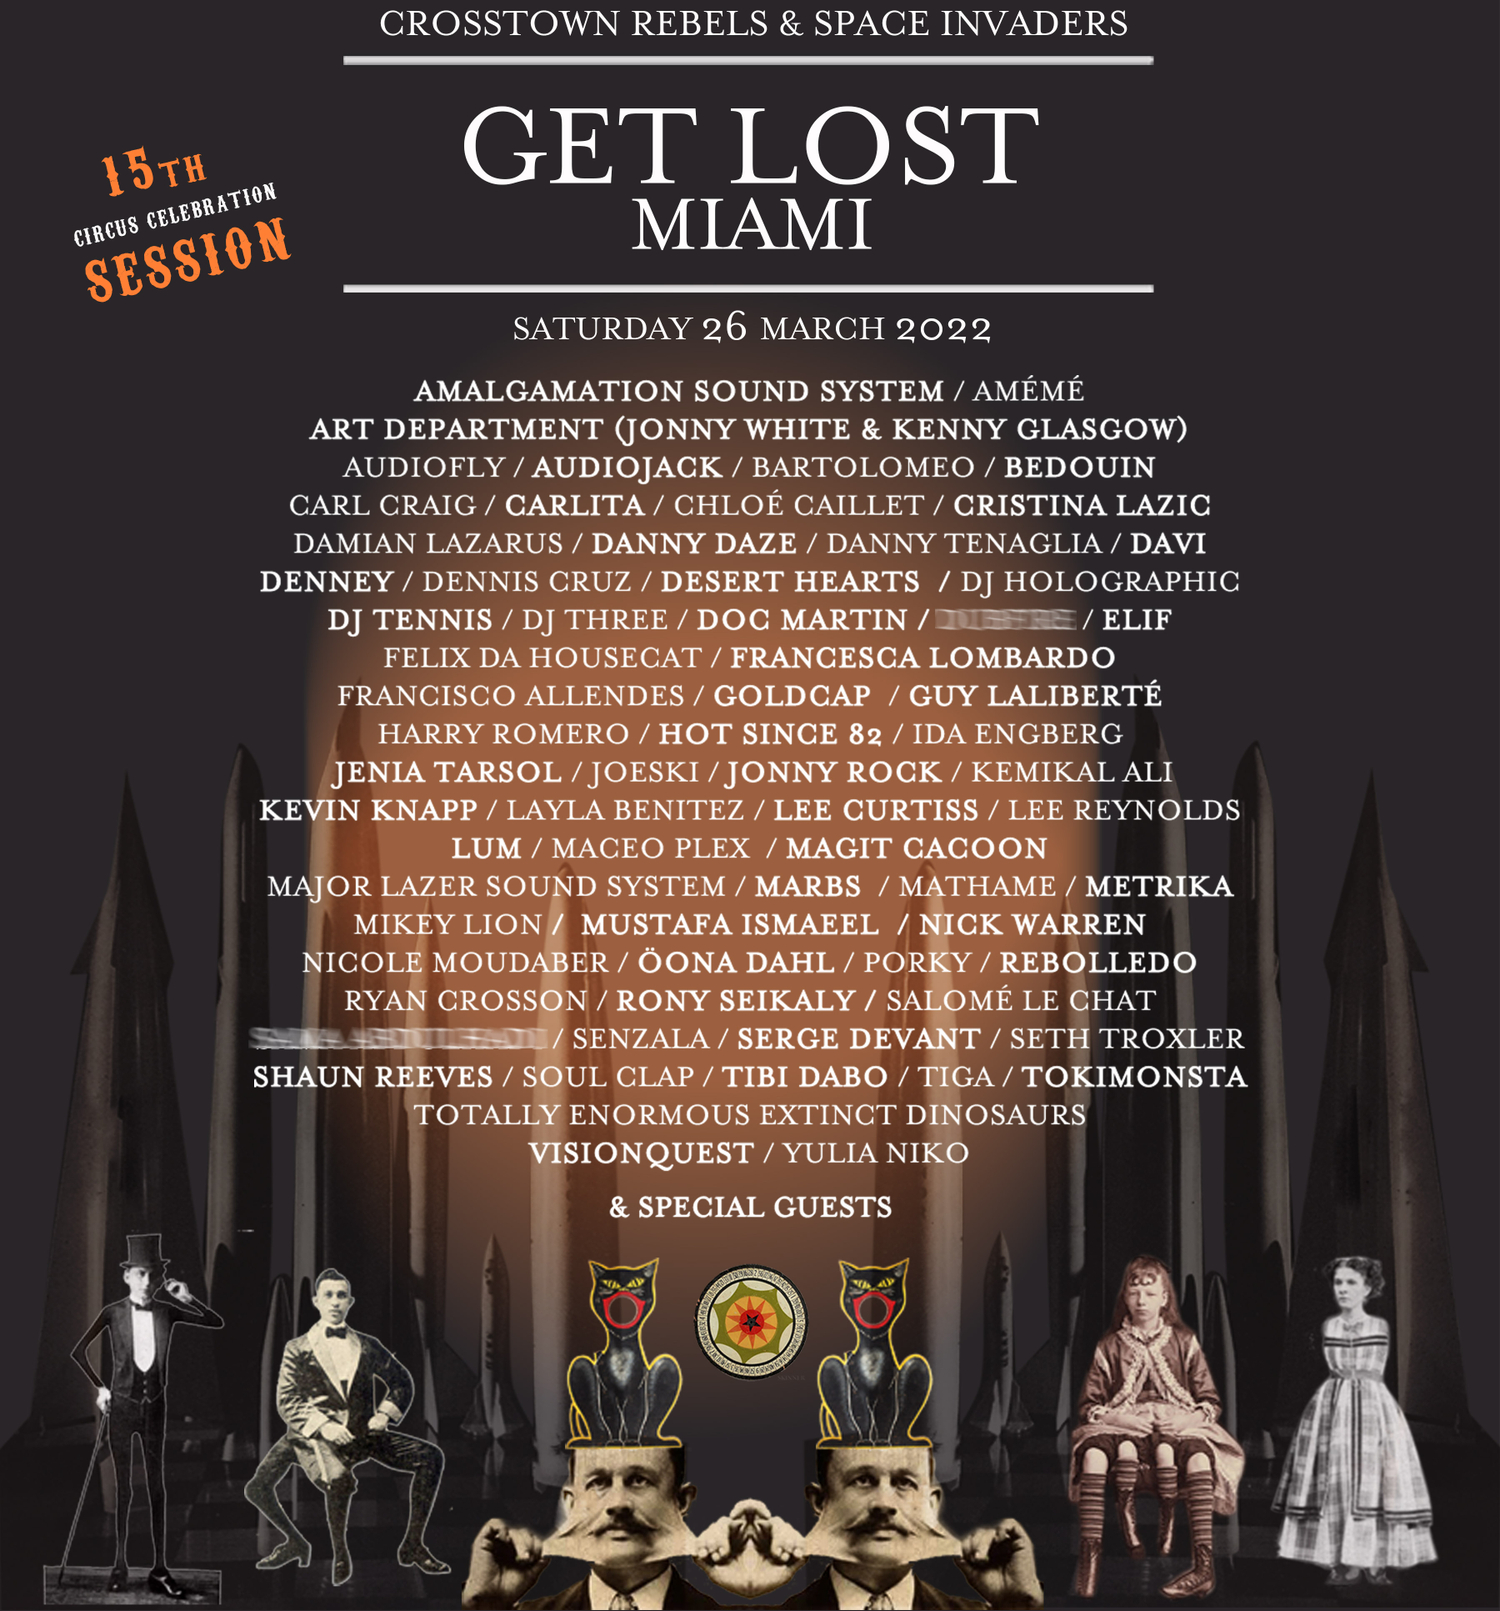 Get Lost 15th Session - Circus Celebration Image